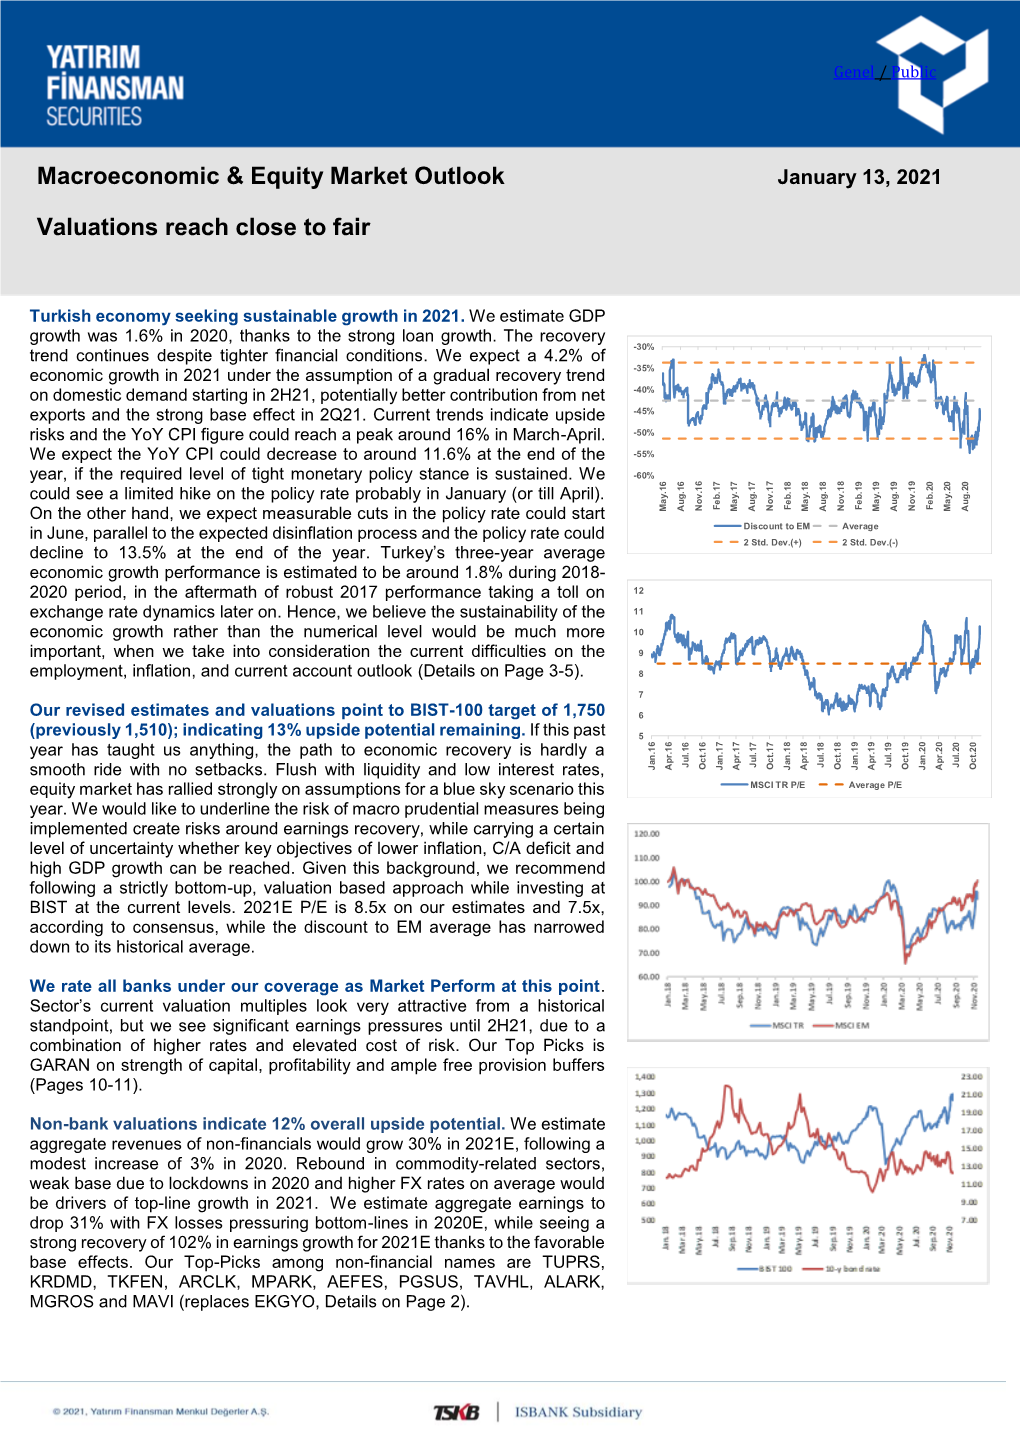 Macroeconomic & Equity Market Outlook Valuations Reach Close to Fair